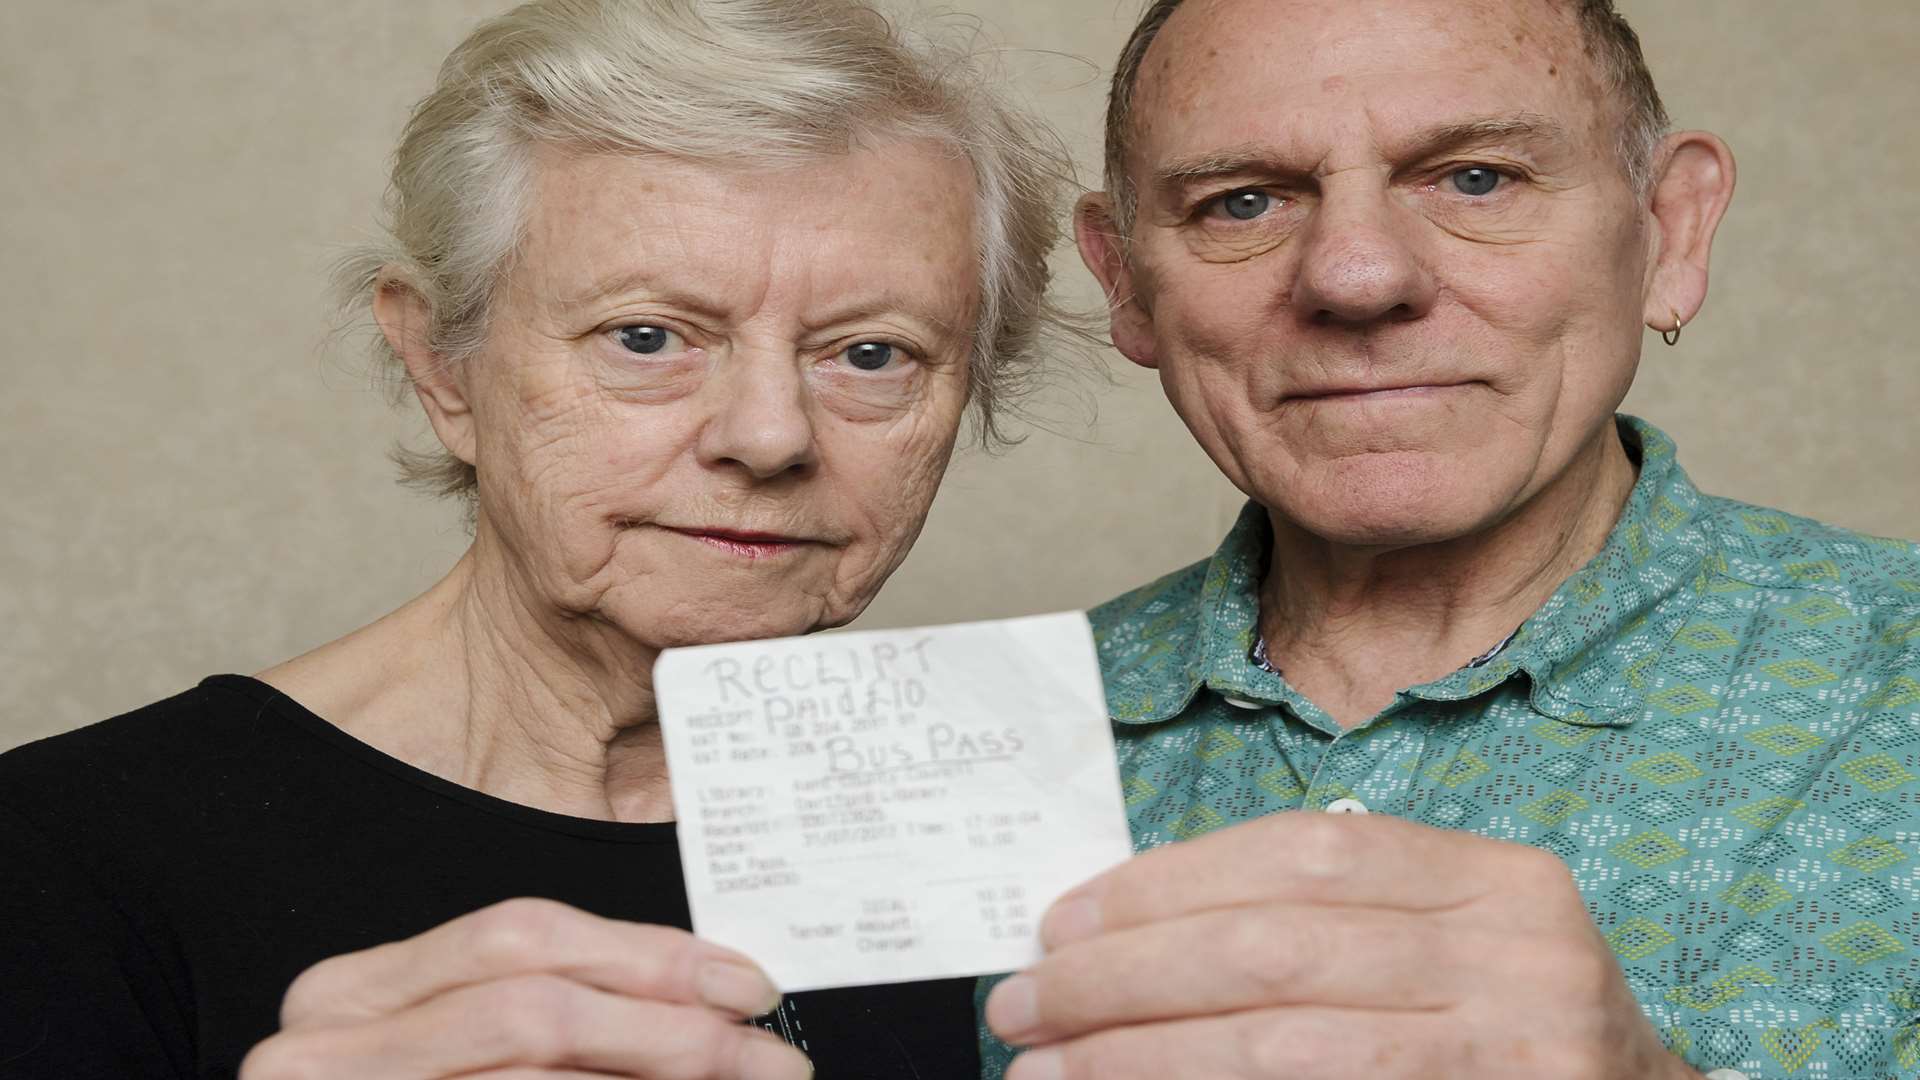 Margaret and David with the receipt